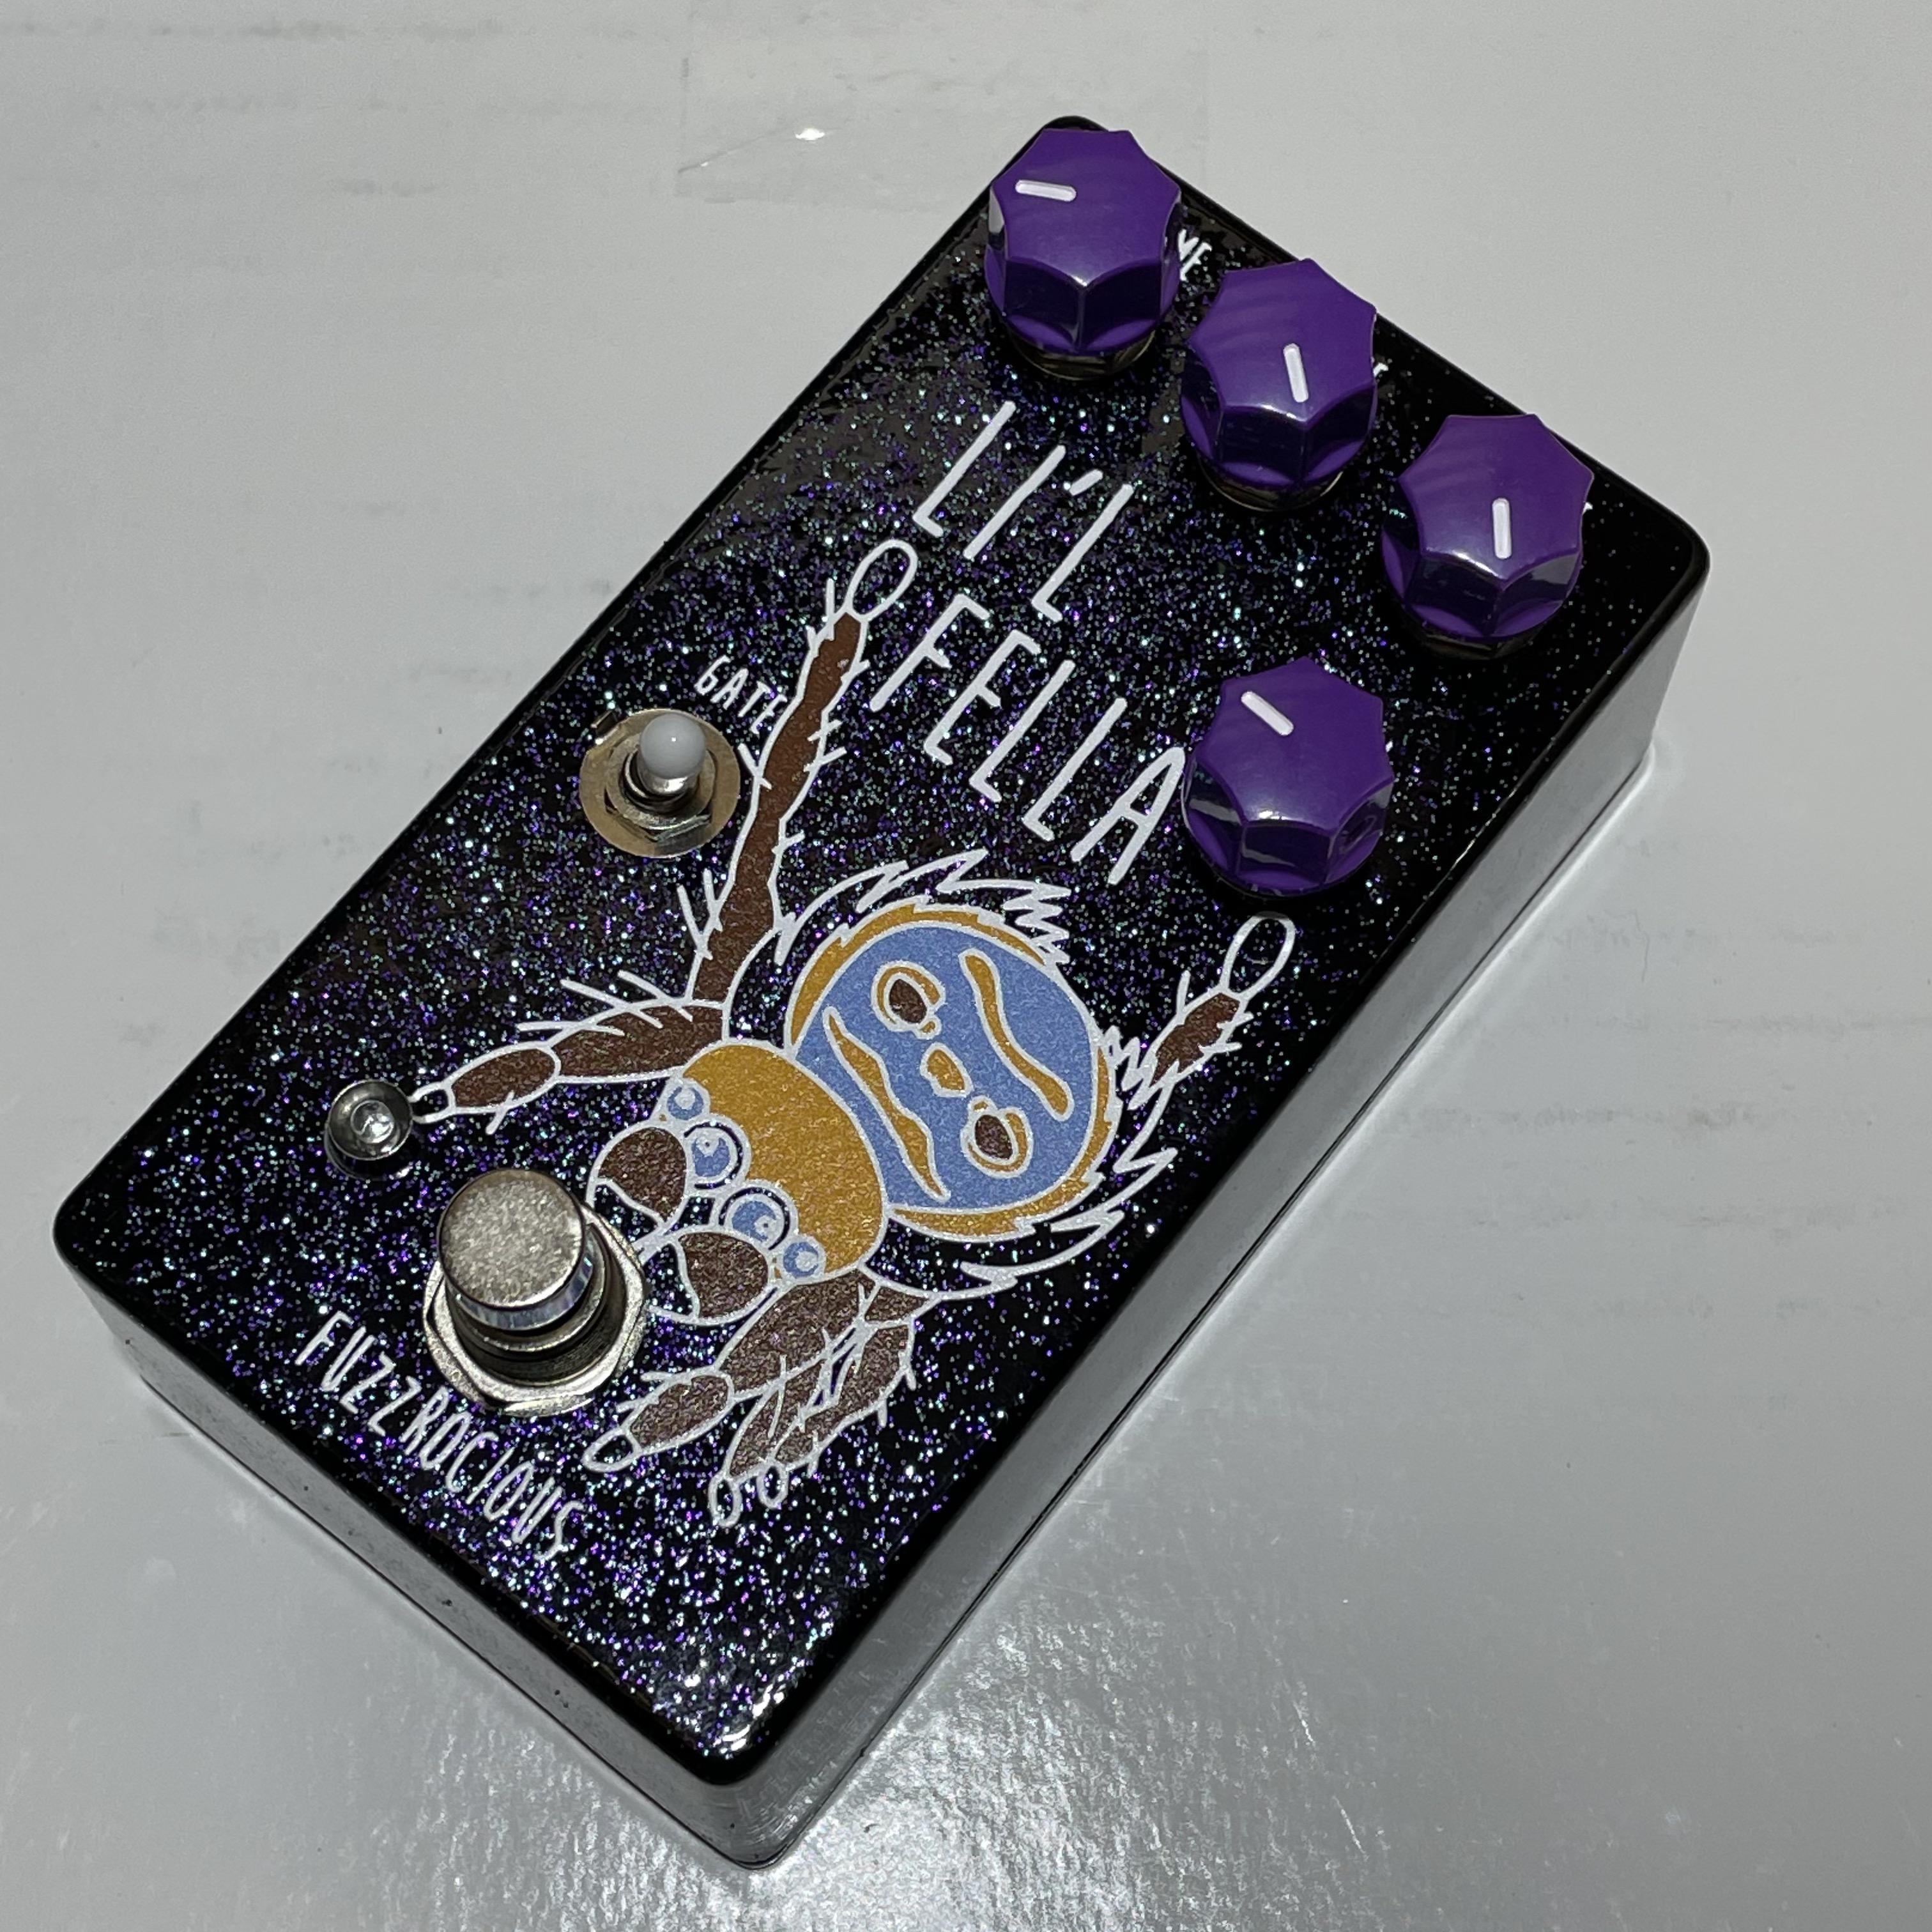 Fuzzrocious Li'l Fella (Exclusive Colorway) | Axe... And You Shall Receive